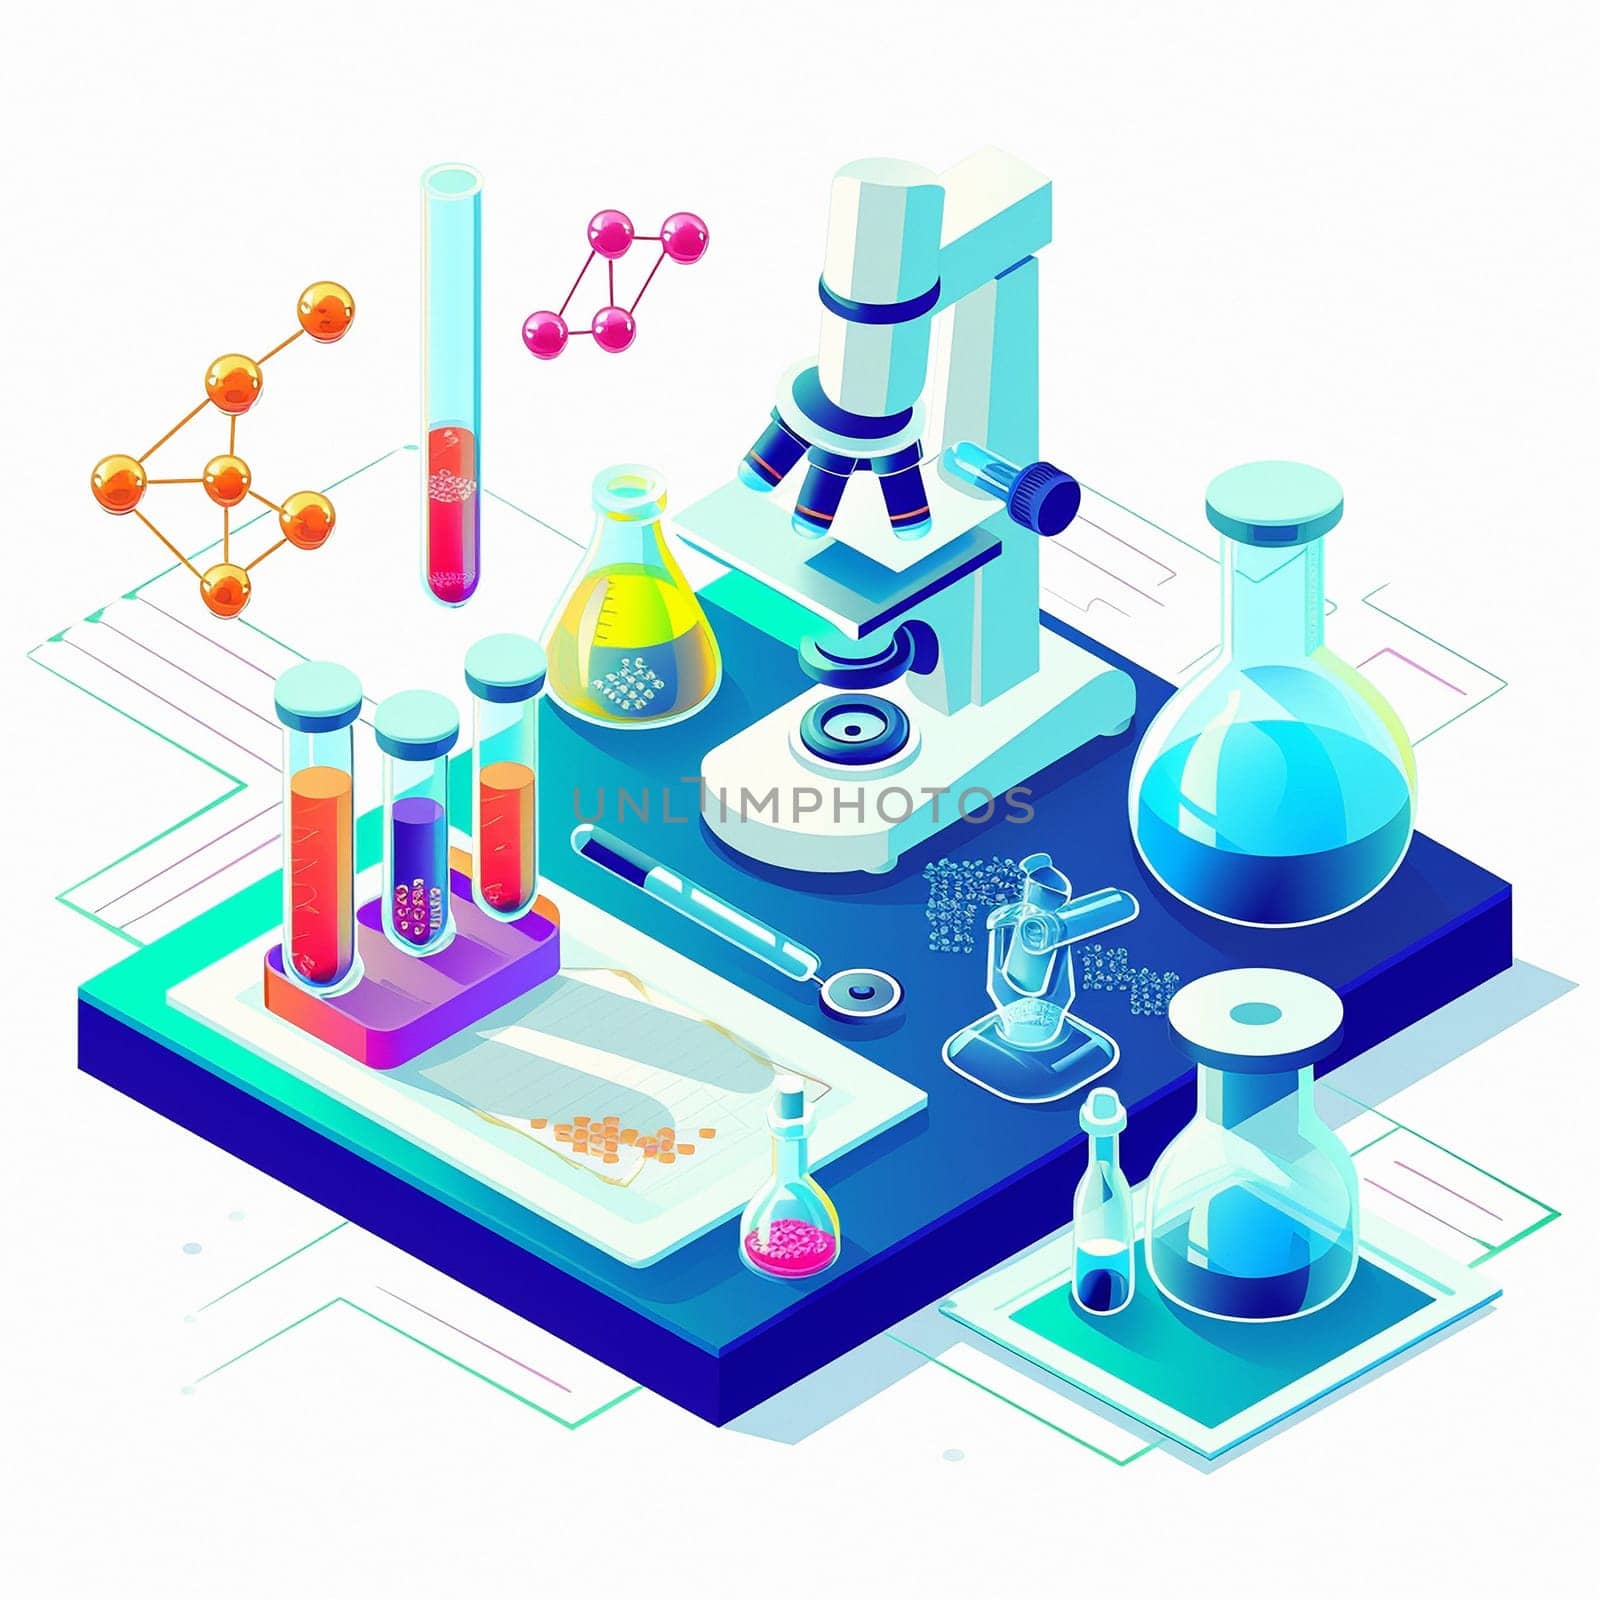 project teamwork in medicine, science and biology. isometric illustration by NeuroSky